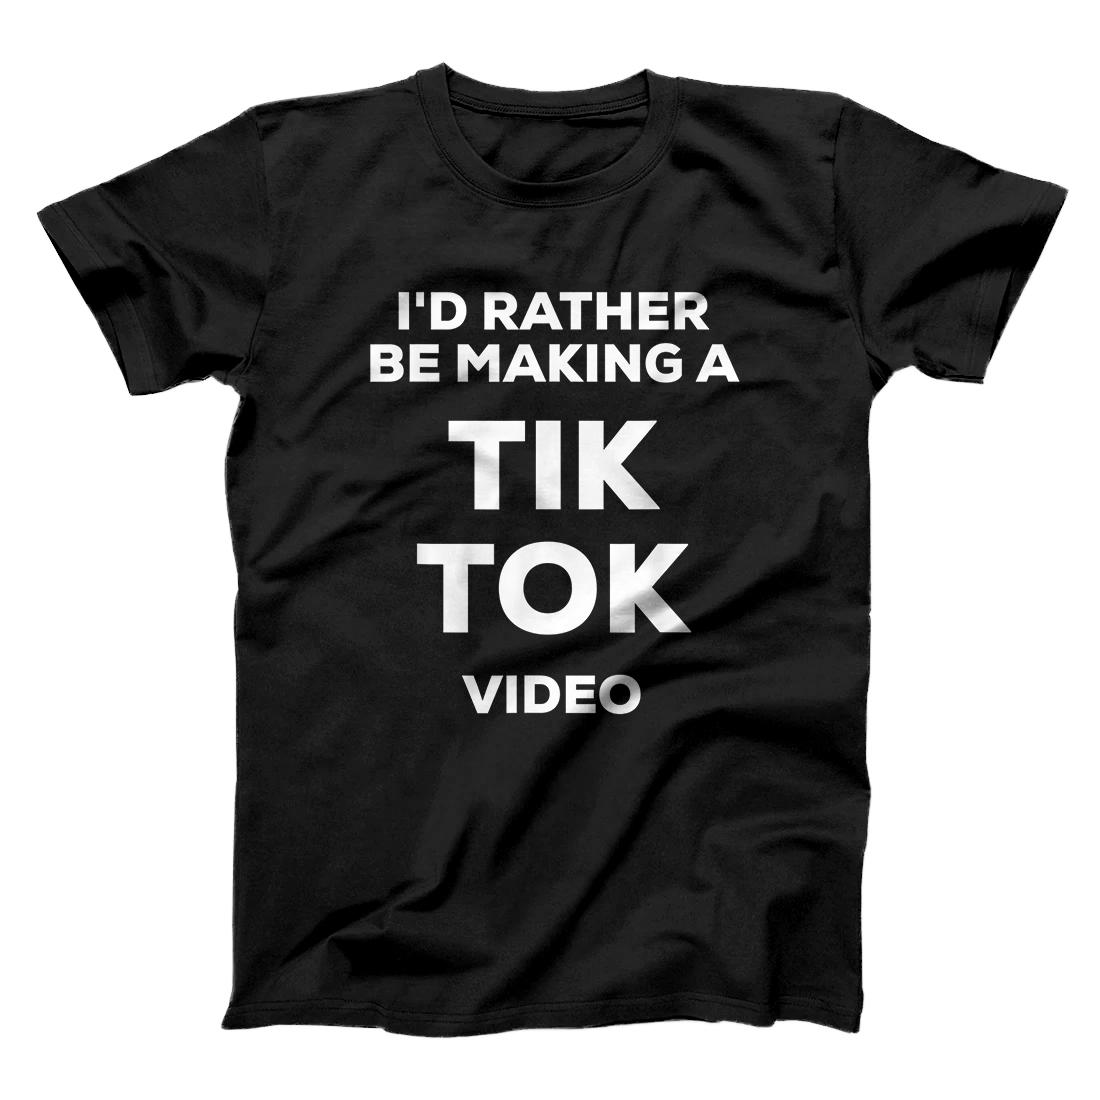 Personalized Funny I'd Rather Be Making a Social Media Tik Viral Video T-Shirt